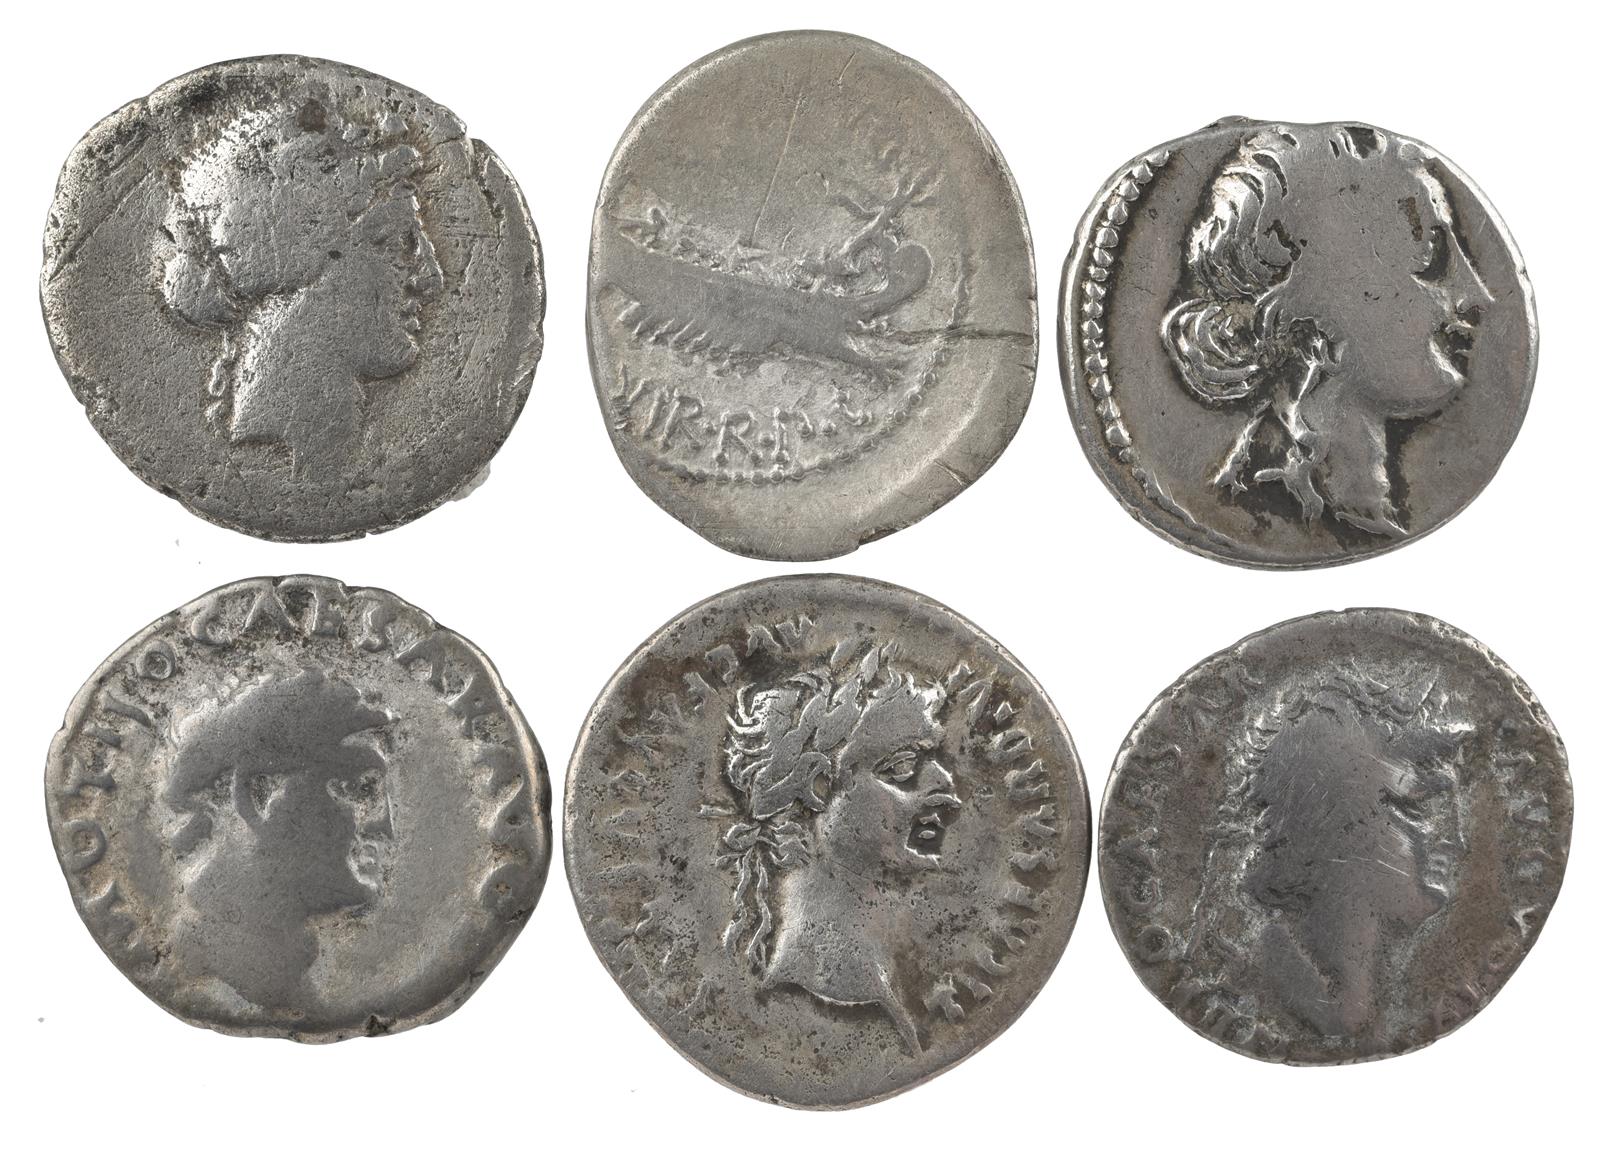 Roman late Republican and early Imperial coinage: denarii (6): C. Vibius Varus (c. 42 BC), head of